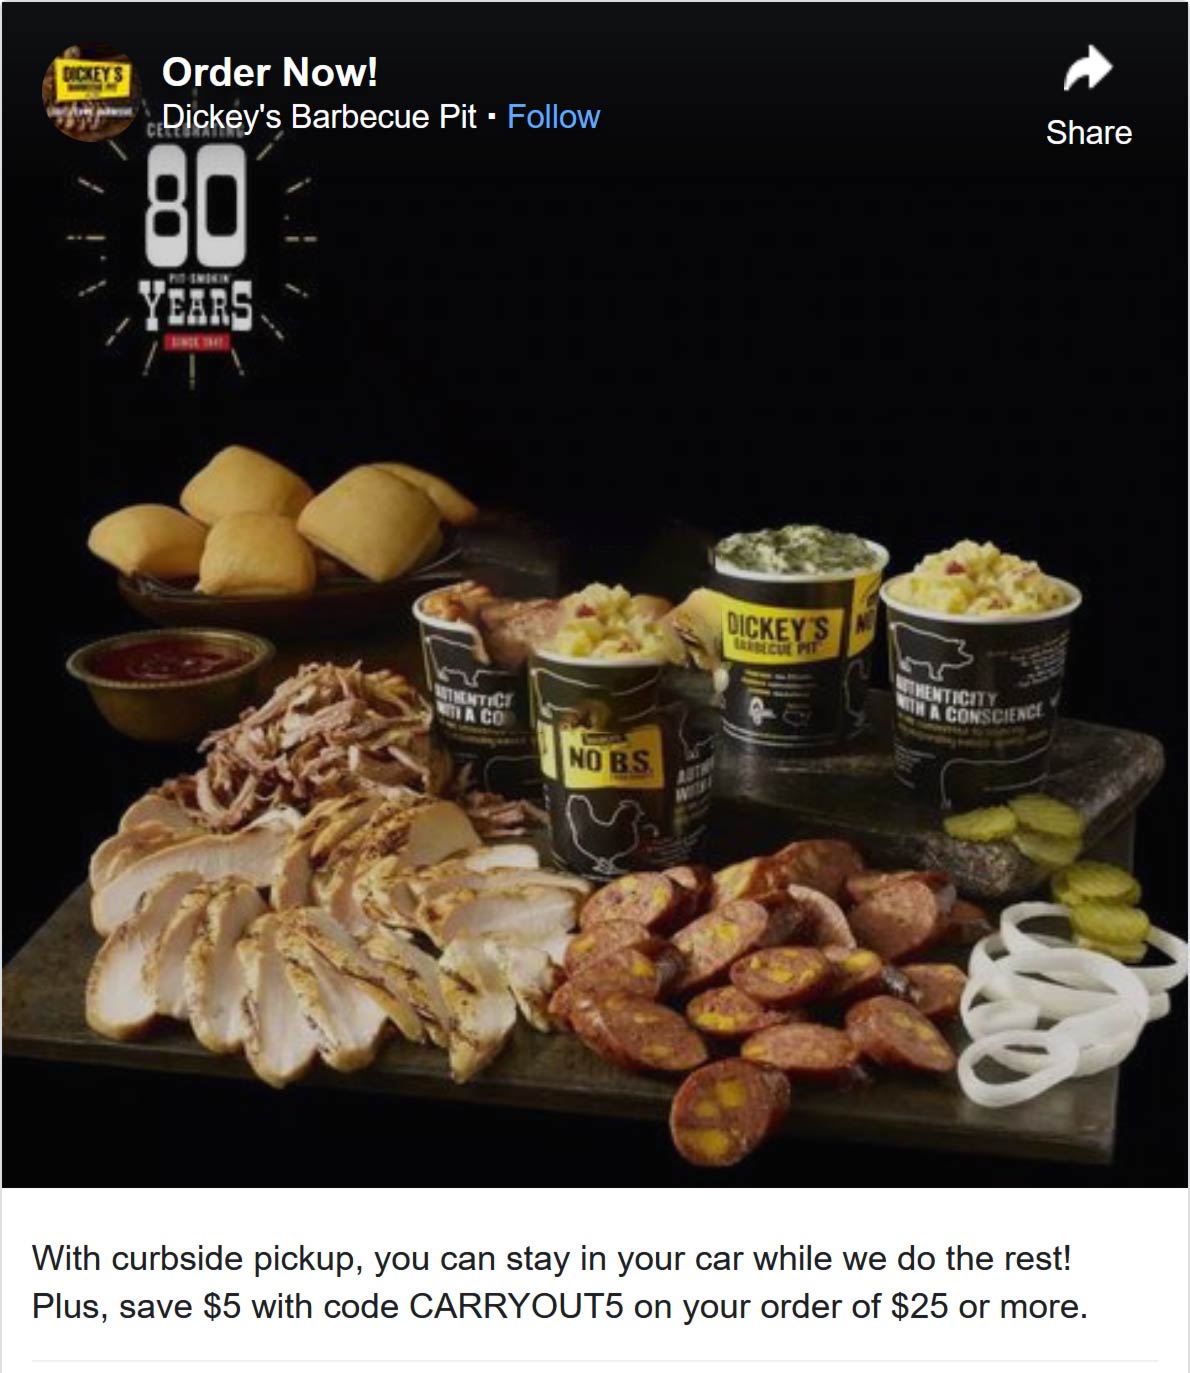 Dickeys Barbecue Pit stores Coupon  $5 off $25 at Dickeys Barbecue Pit via promo code CARRYOUT5 #dickeysbarbecuepit 